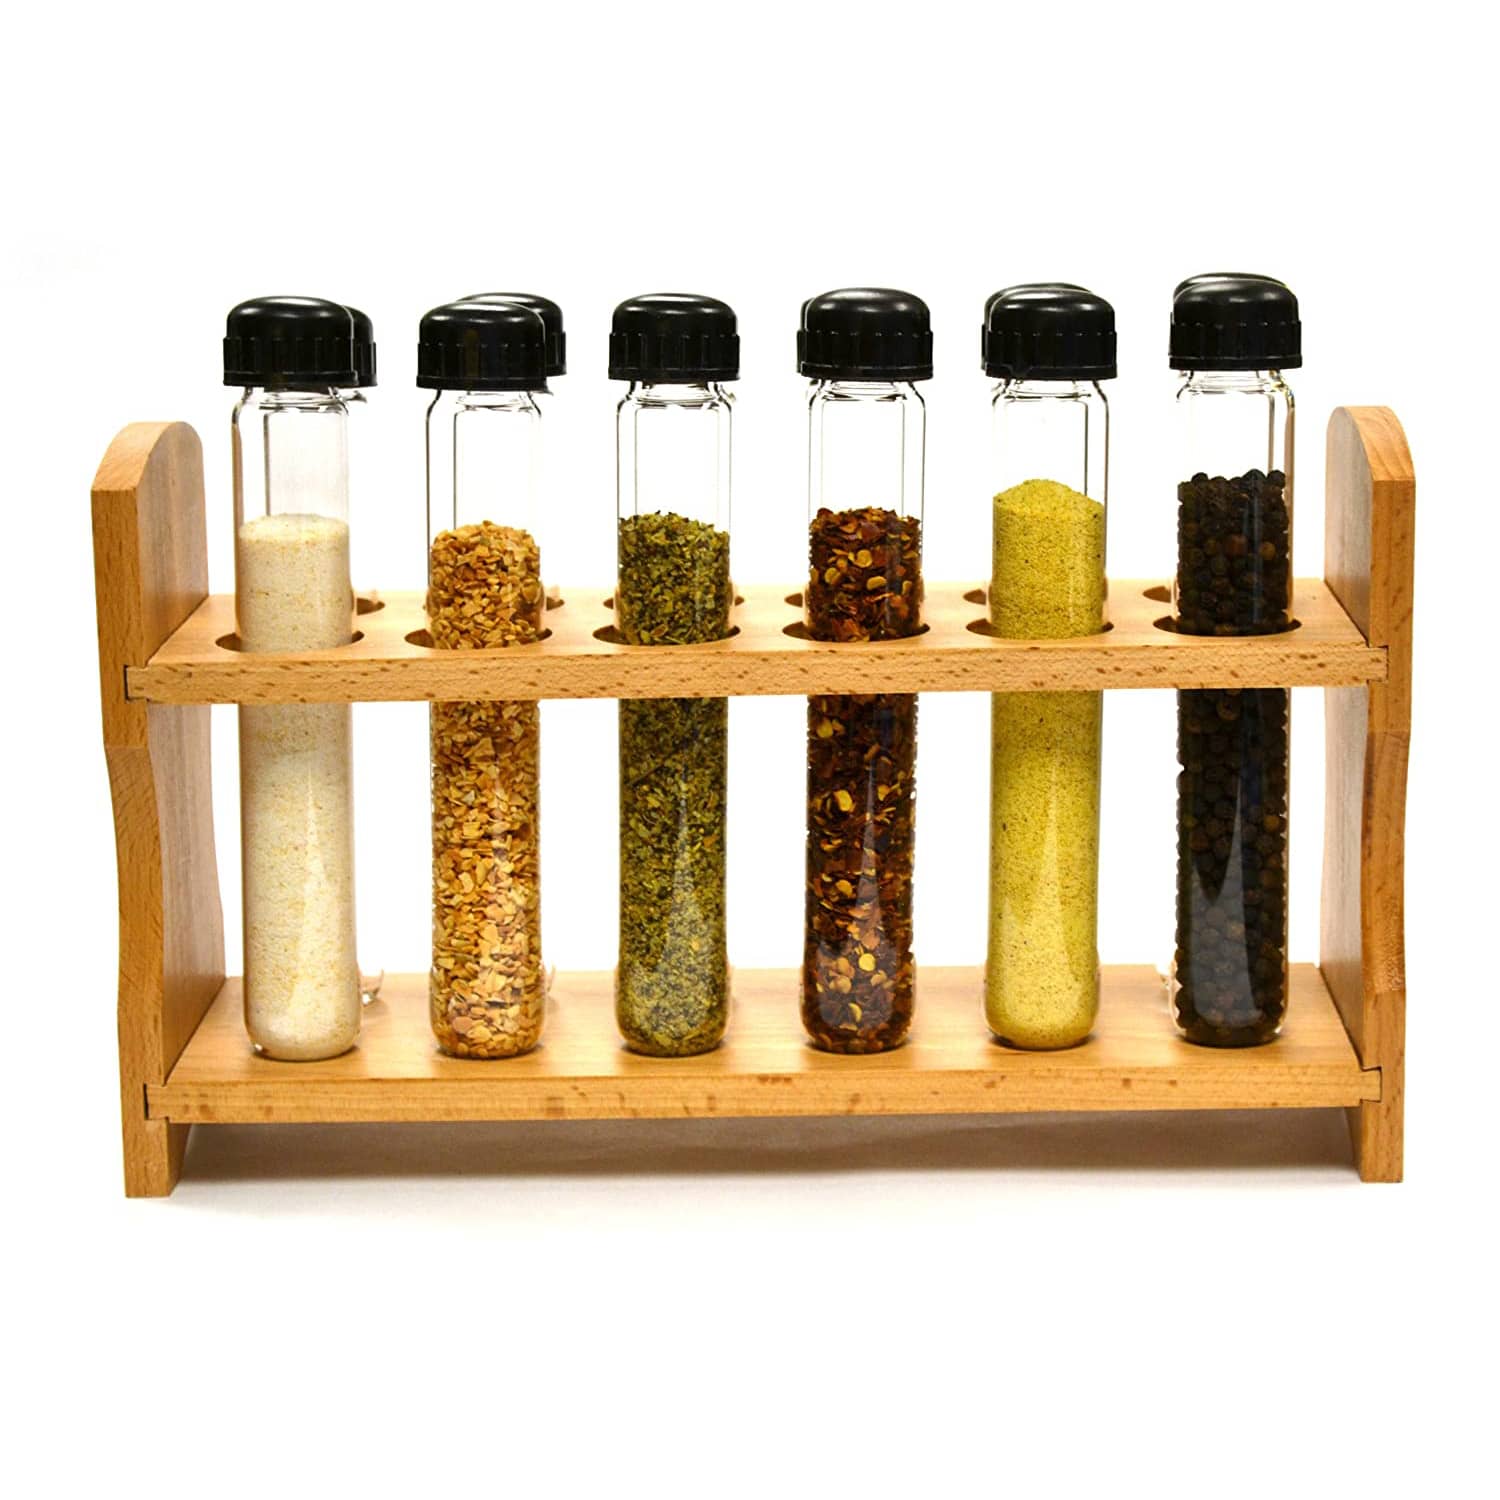 Best Ways to Organize Your Spices 2021